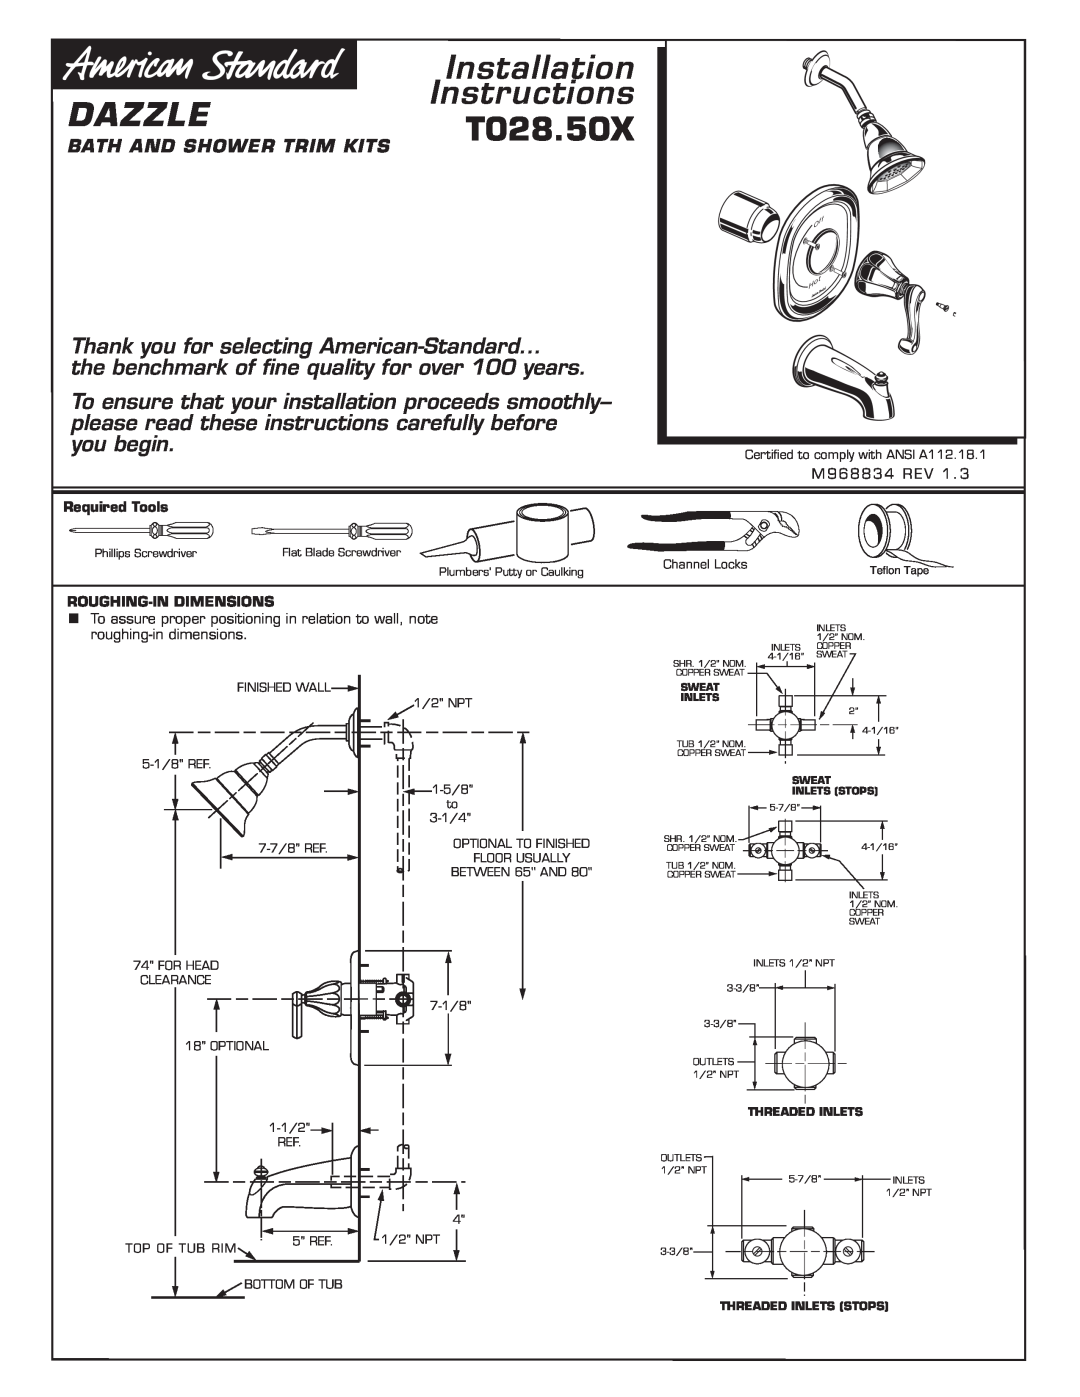 American Standard T028.50X installation instructions Dazzle, Bath And Shower Trim Kits, Installation, Instructions 